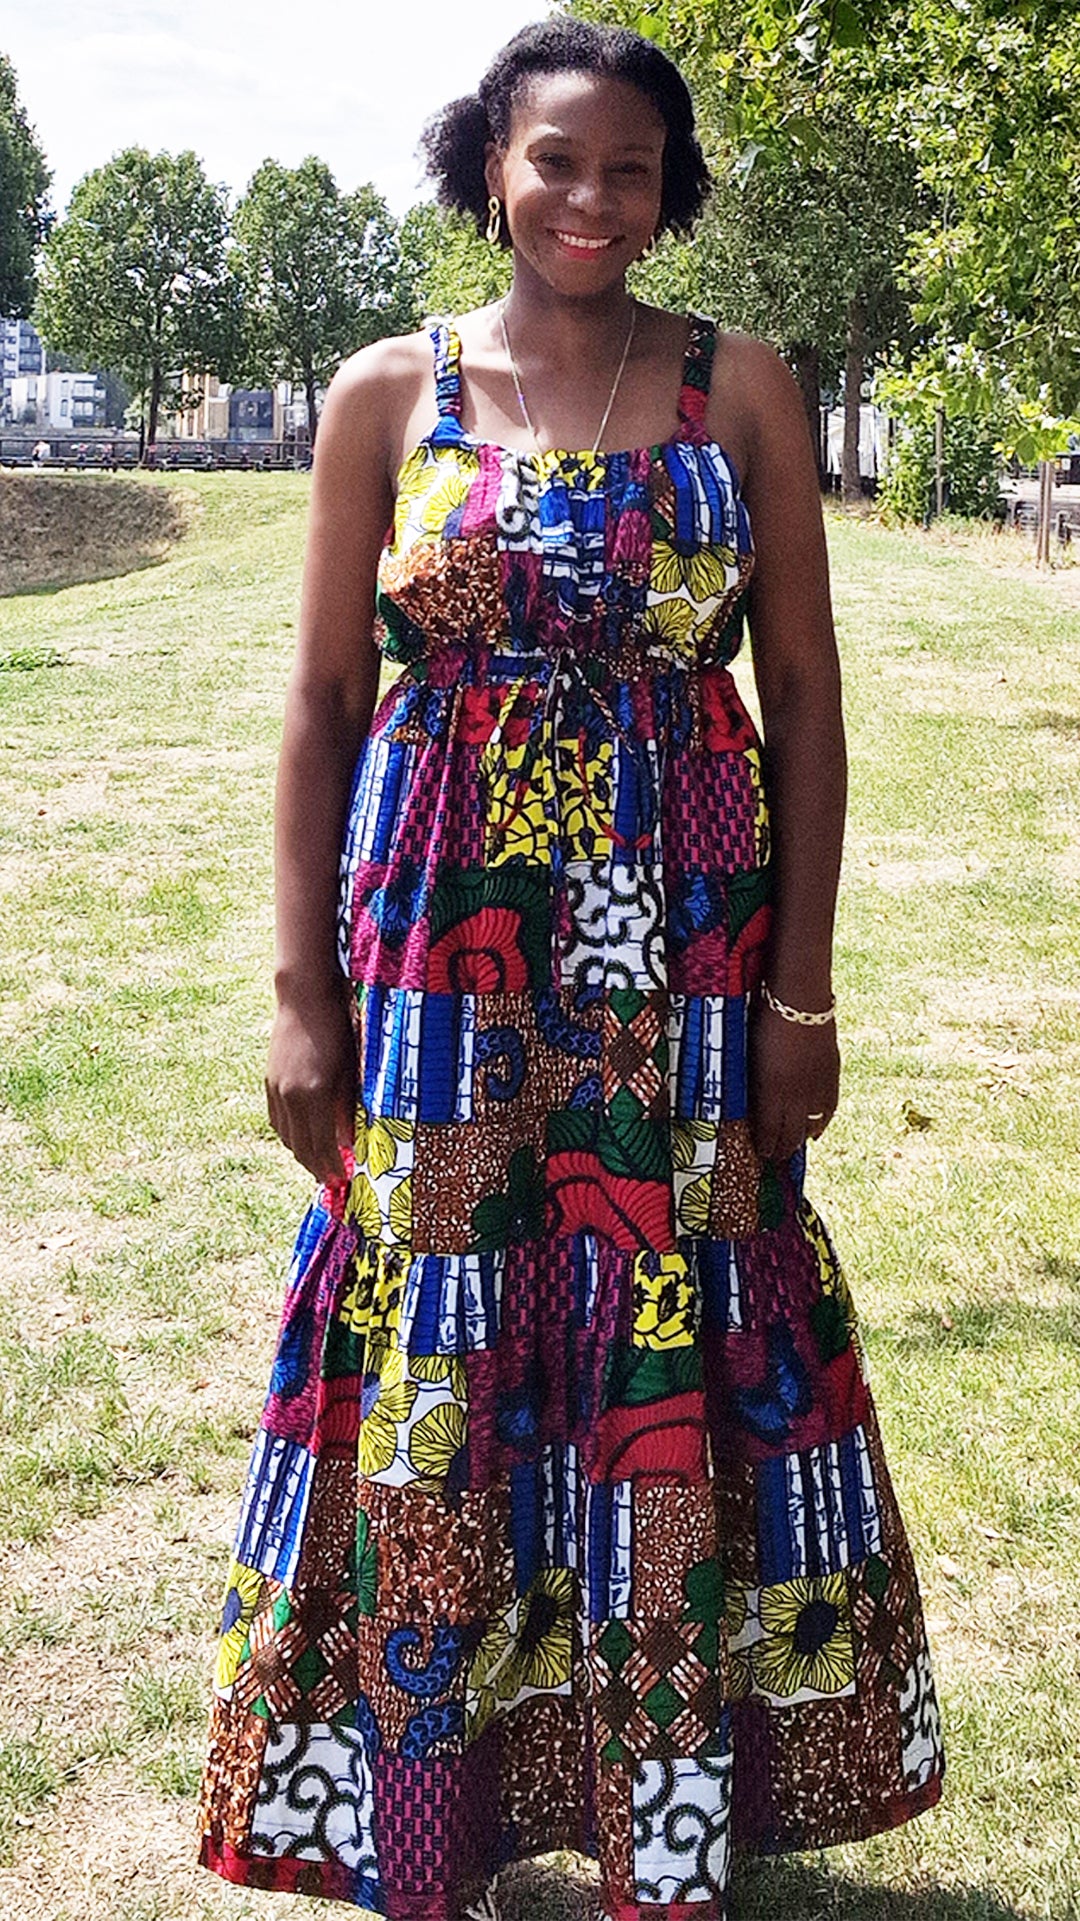 A woman posing with a radiant smile in a maxi long print patchwork dress, adorned with jewellery, in a park setting.